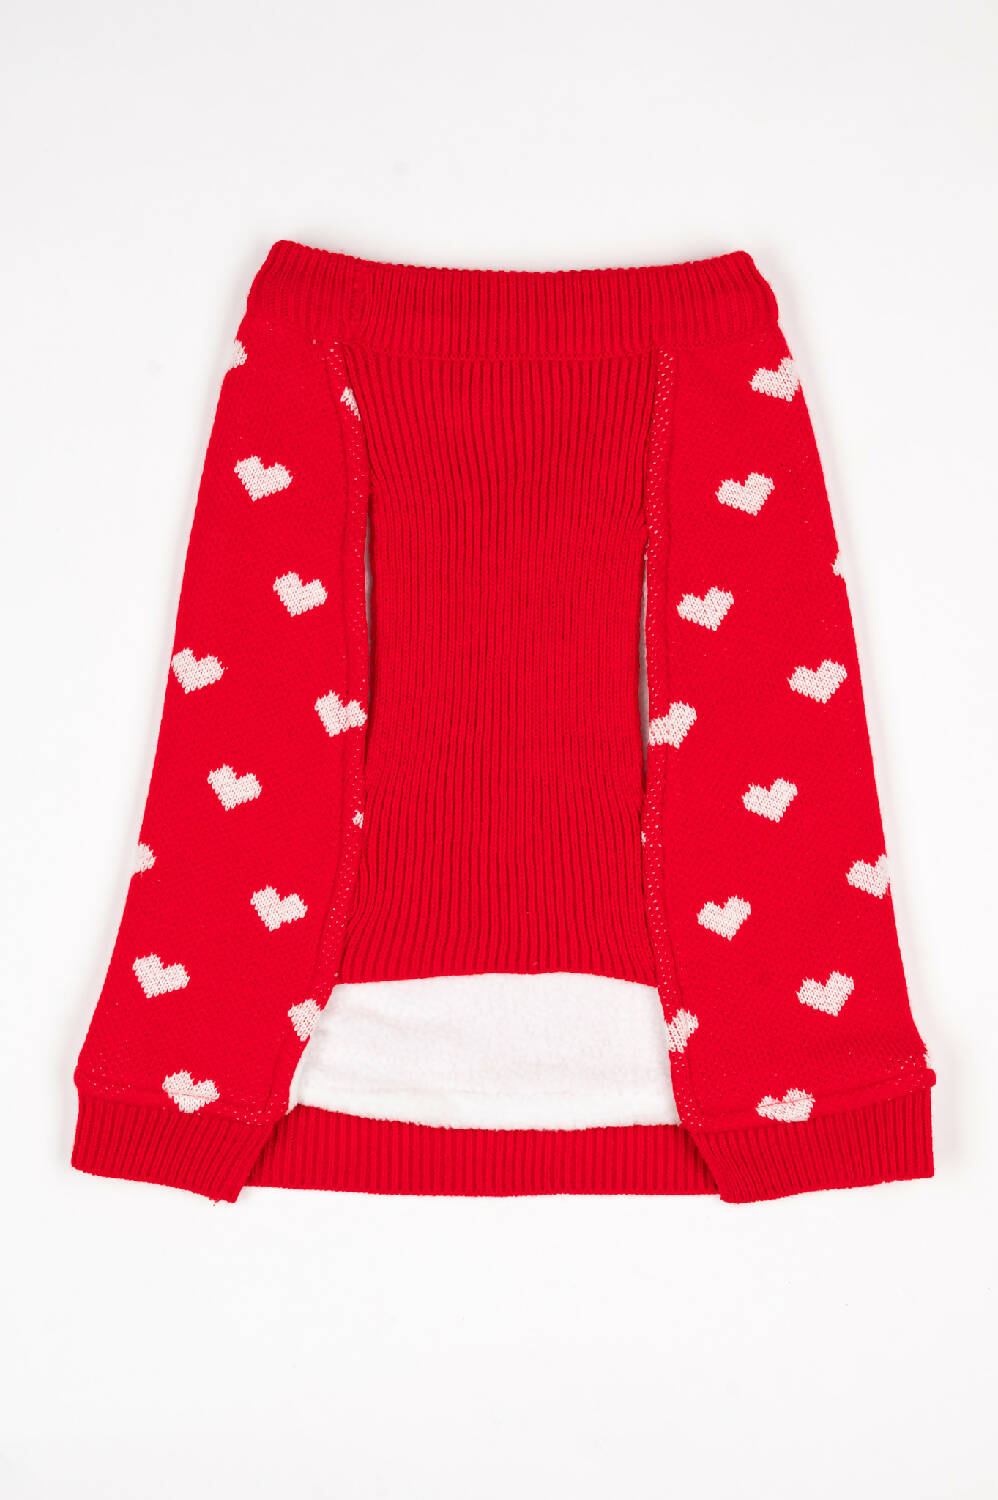 Petsnugs - Red Heart Sweater for dogs and cats